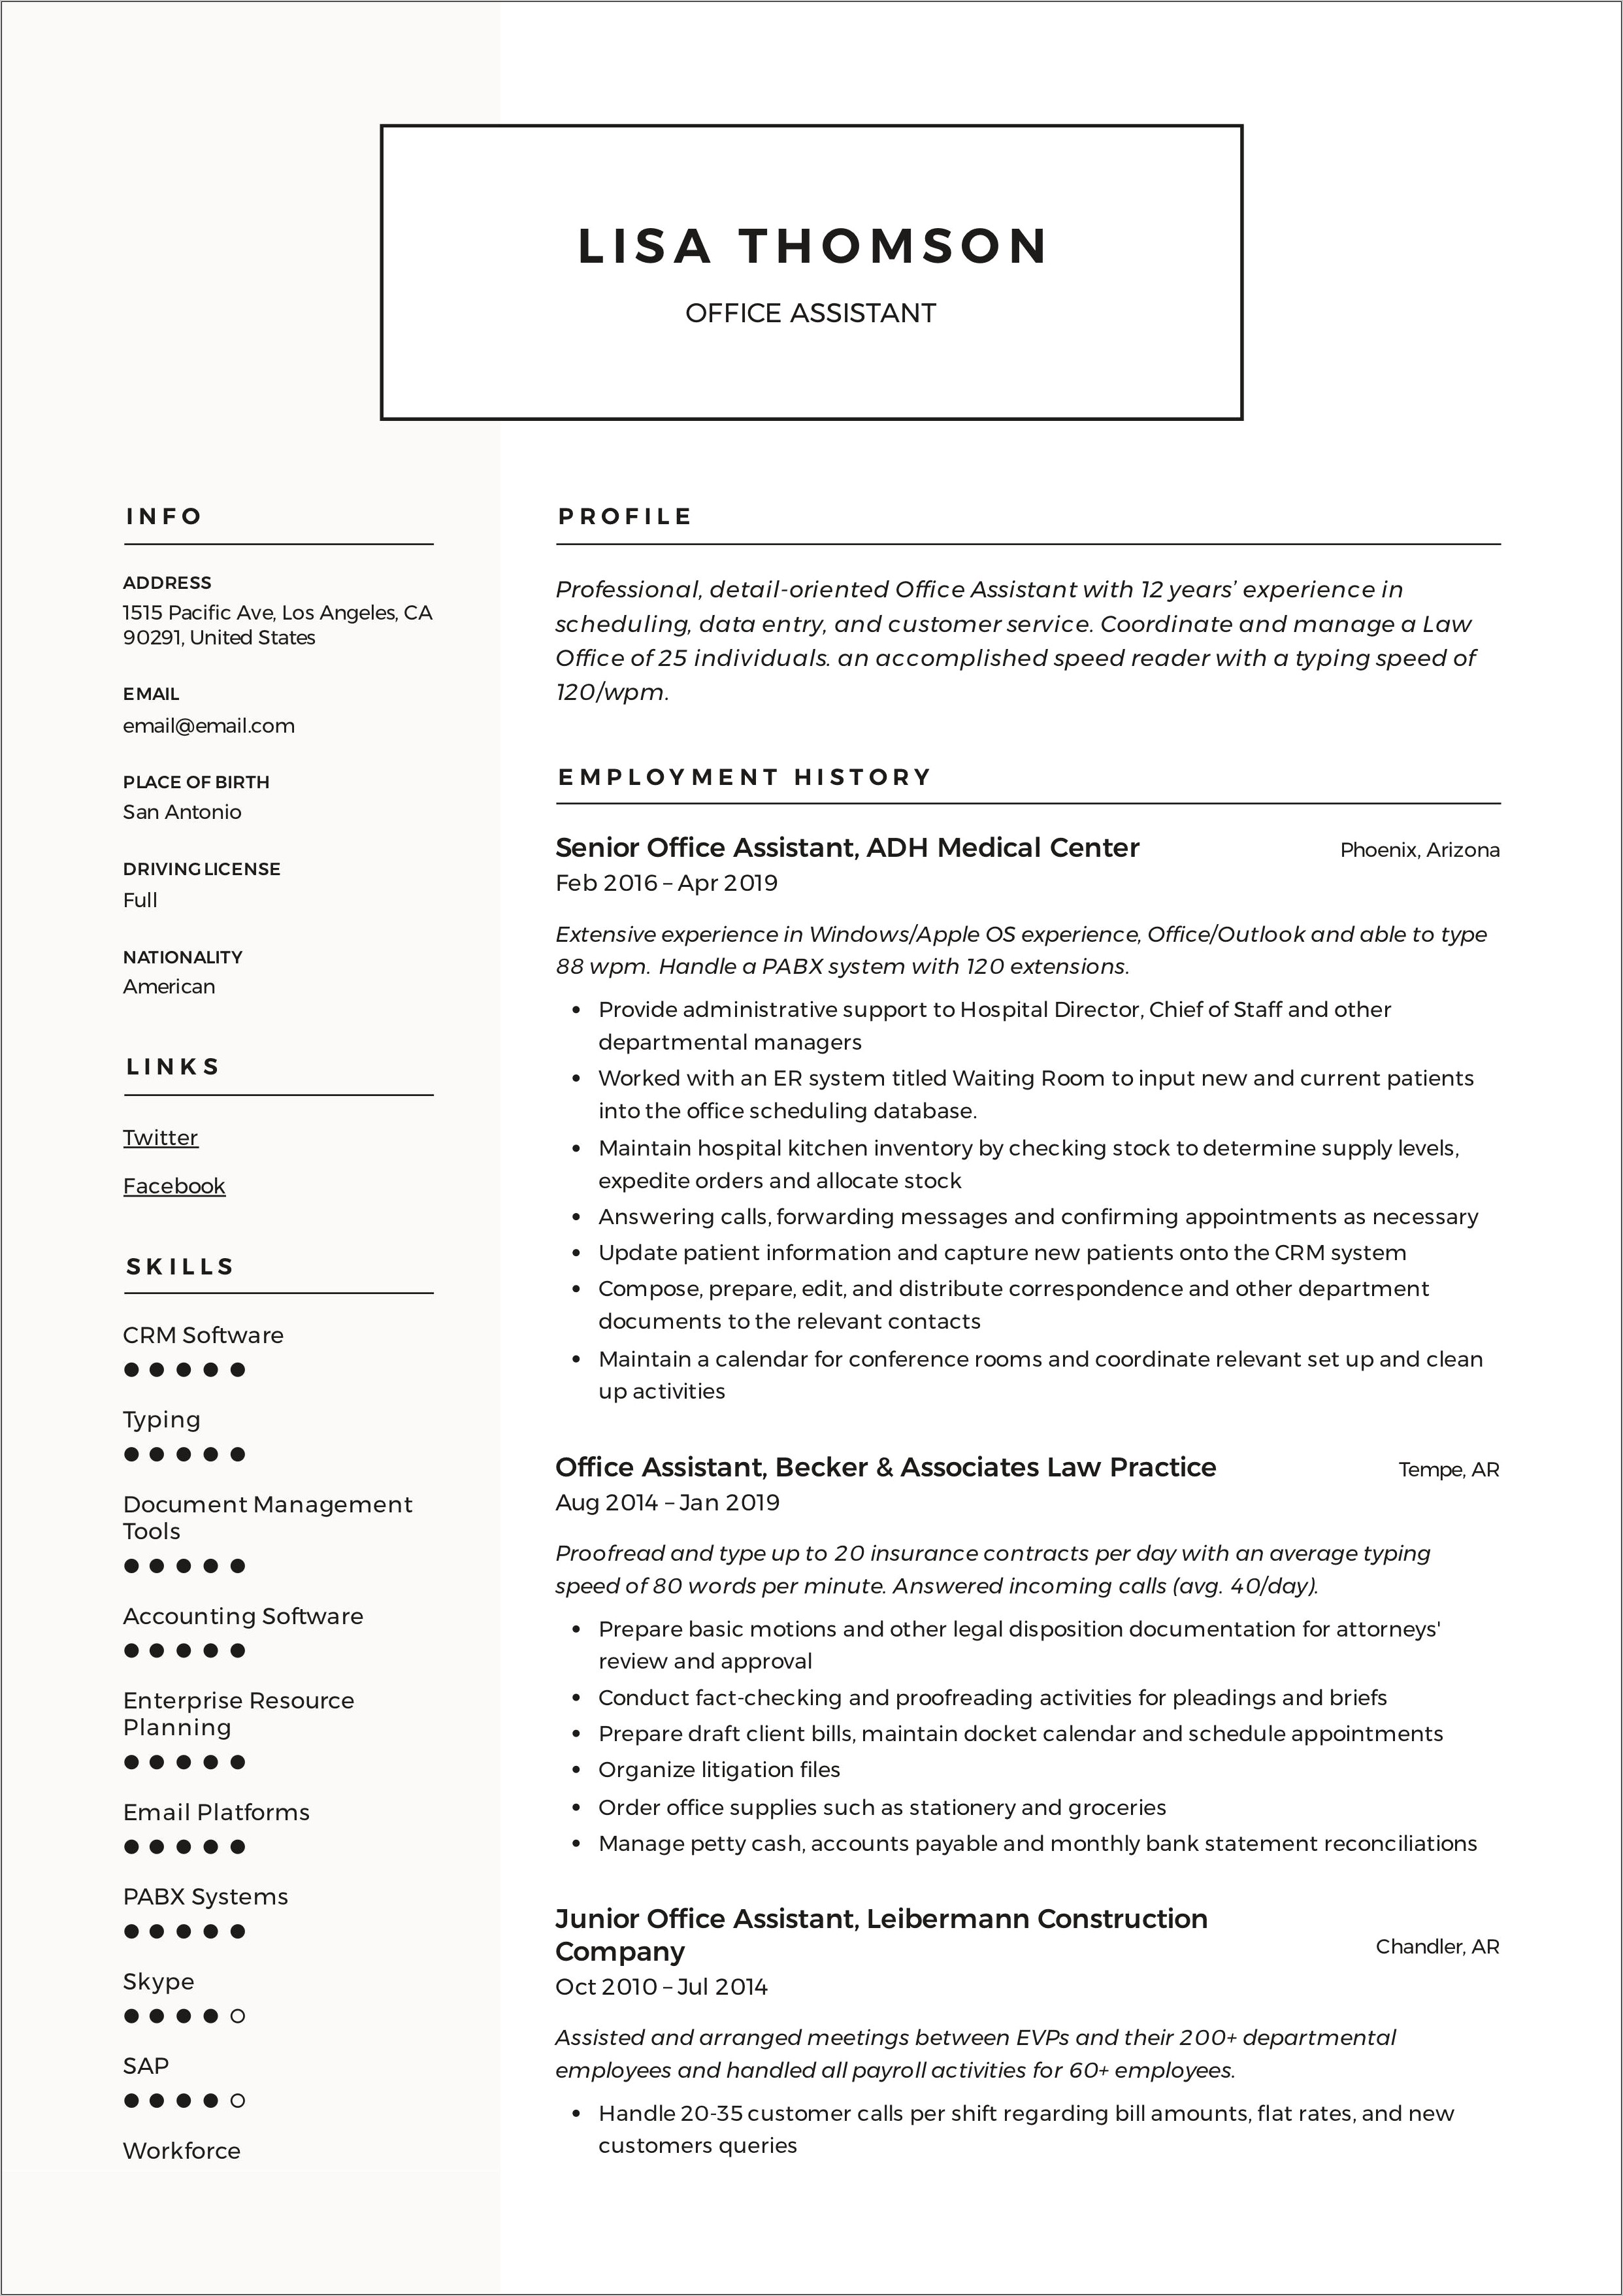 Resume For Administrative Assistant At A School